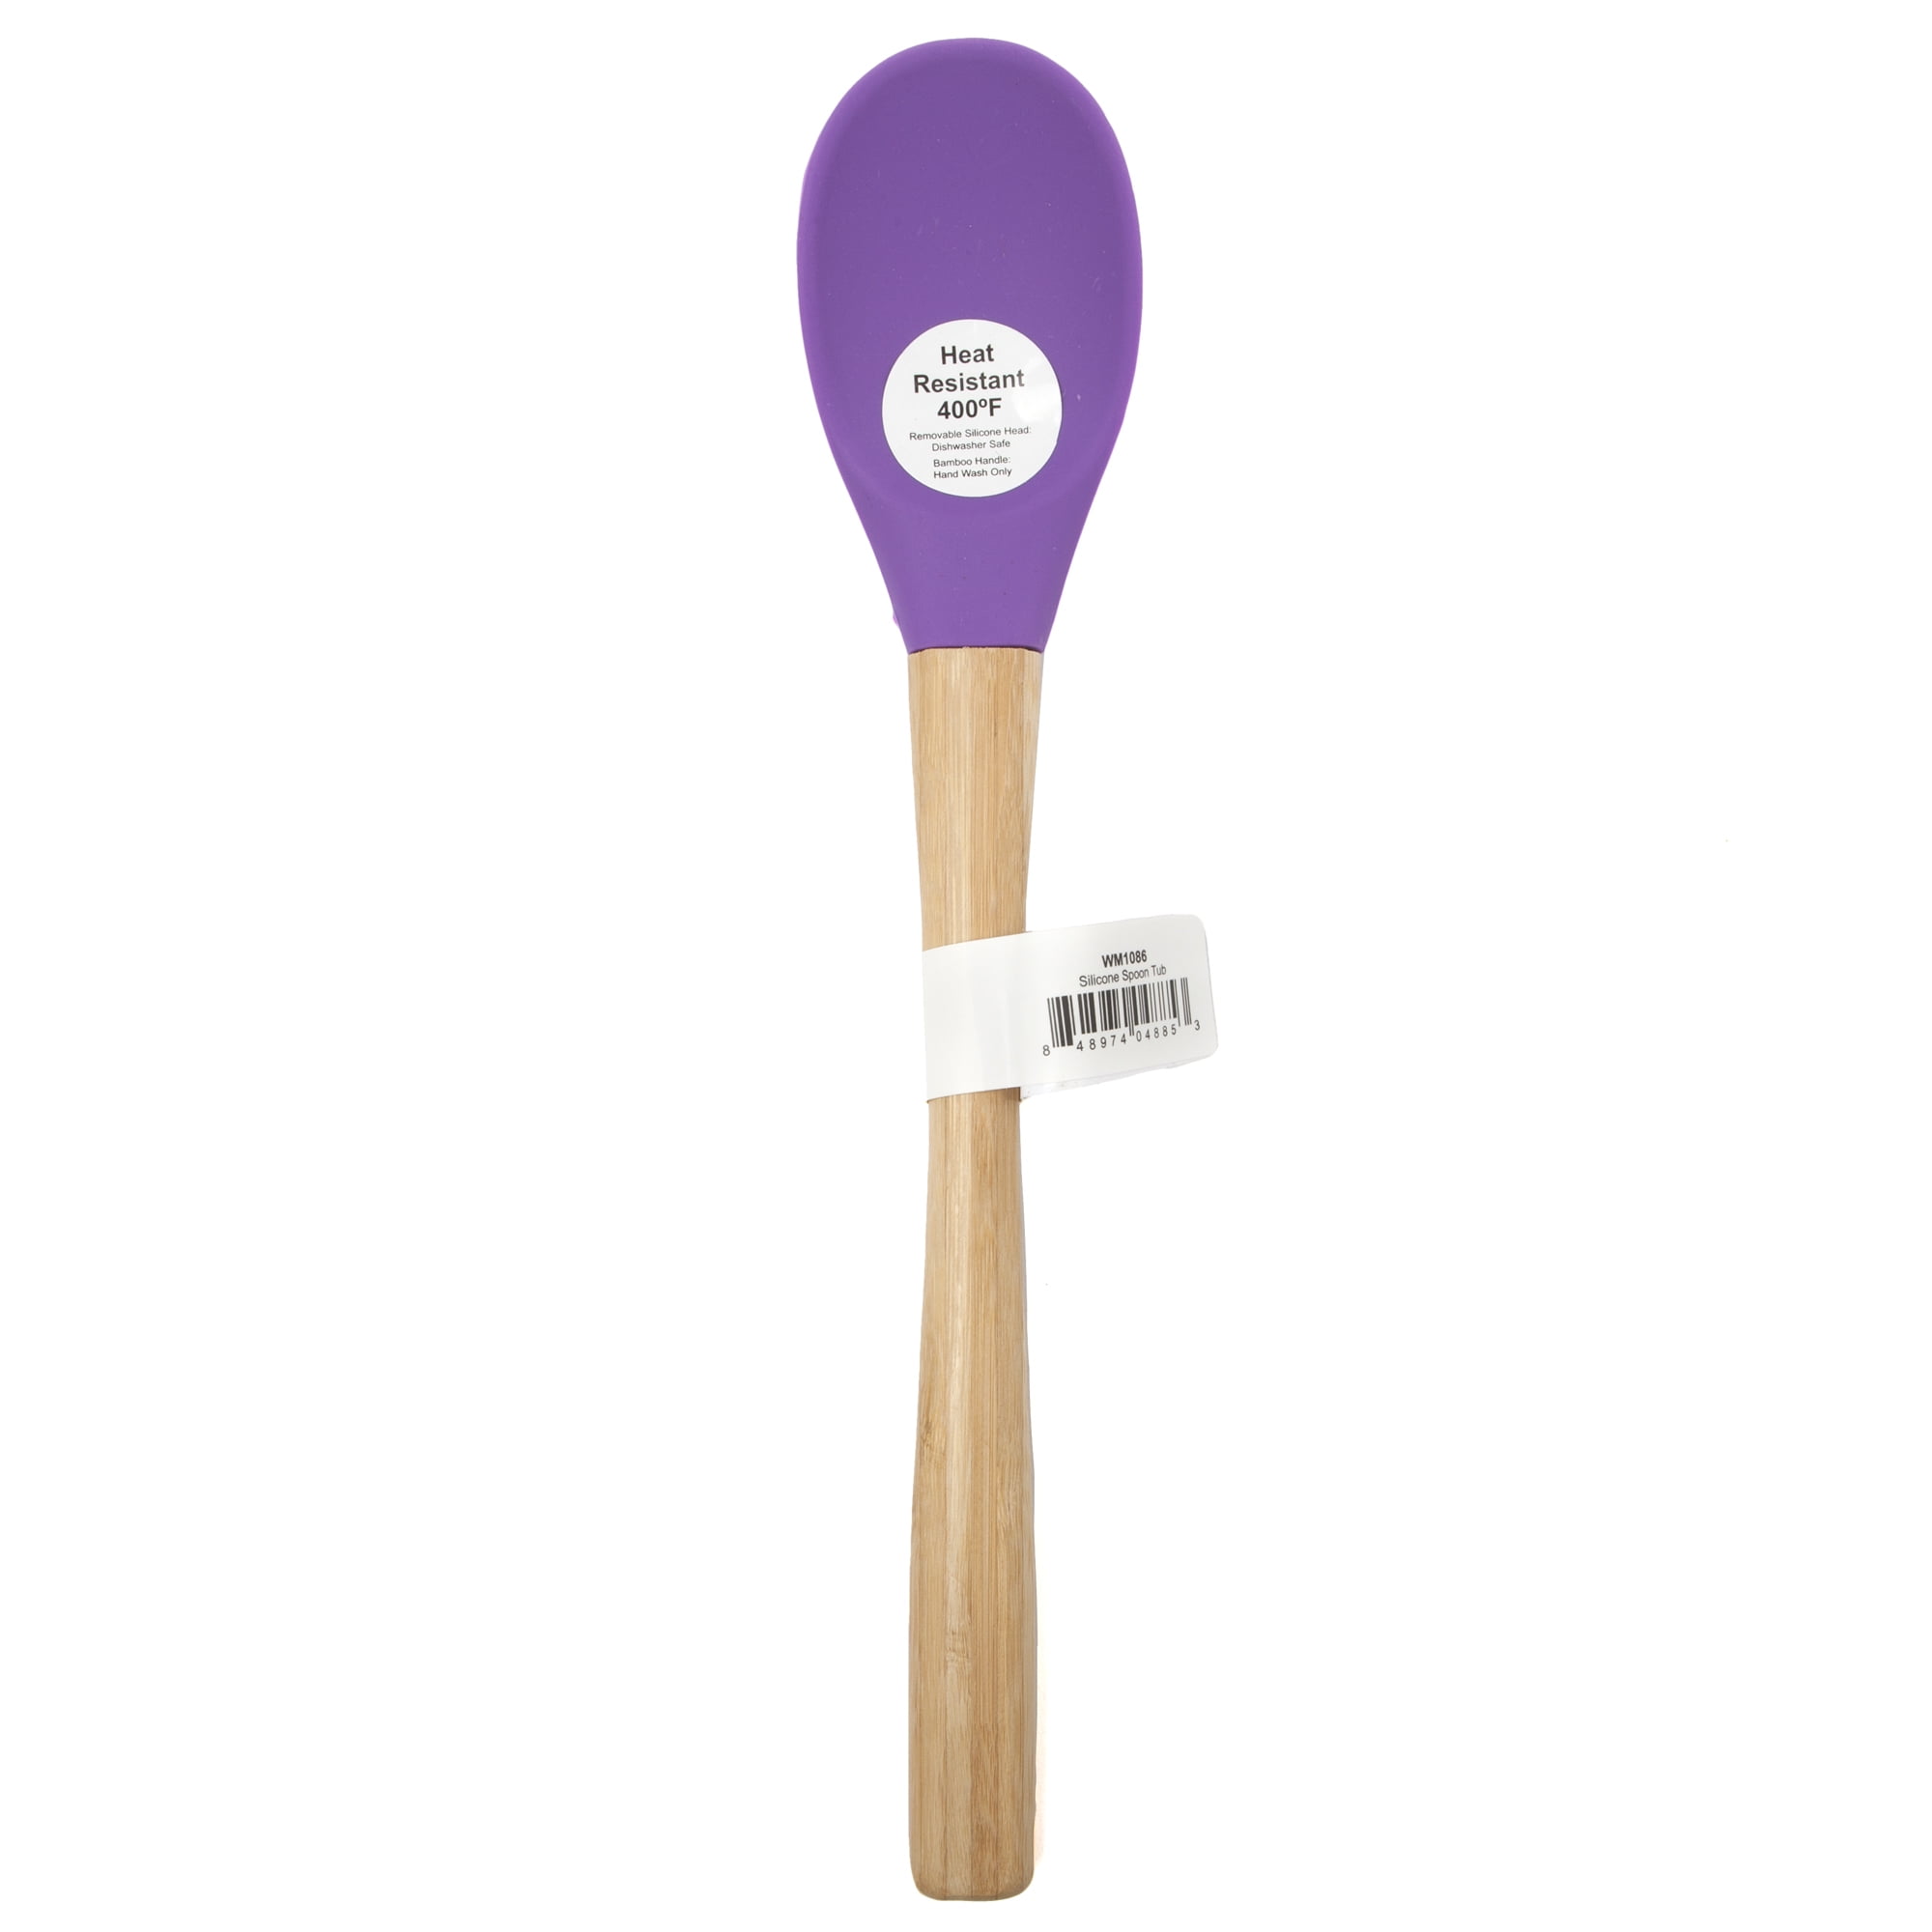 Mainstays Silicone Spoon 